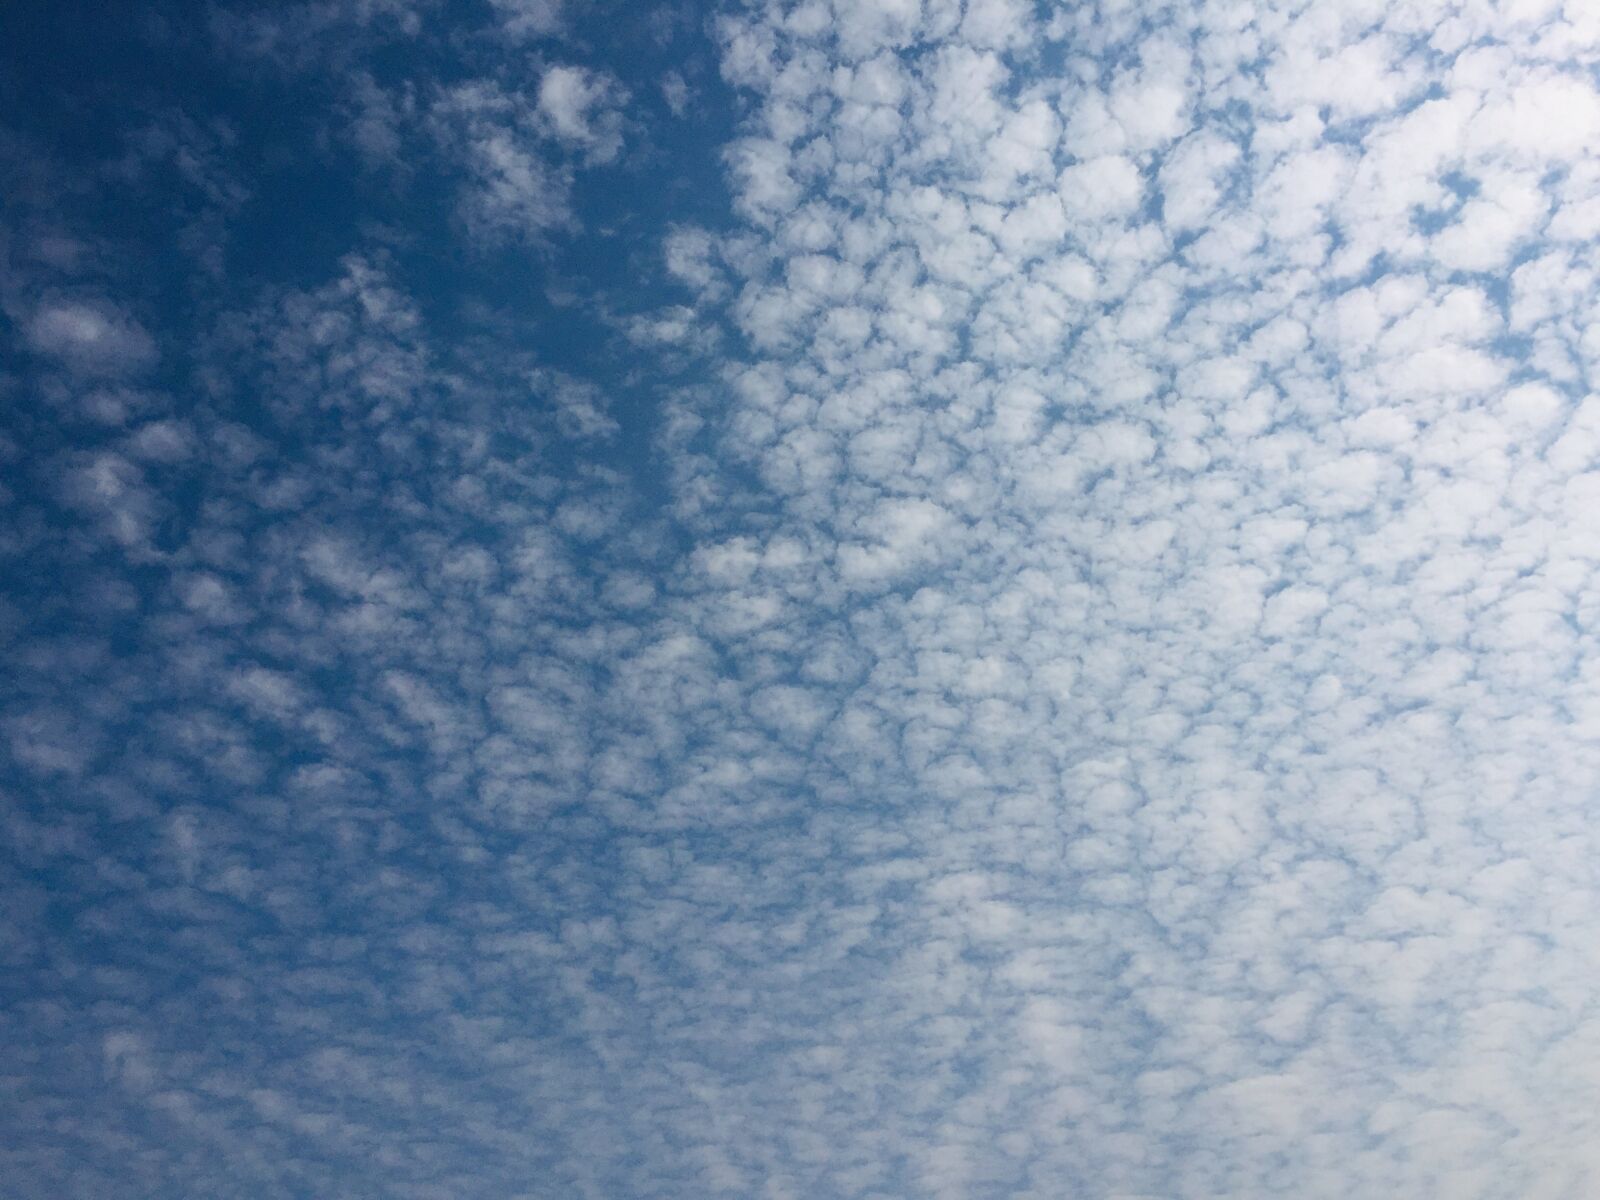 Apple iPhone 6 sample photo. Clouds, sky, blue photography